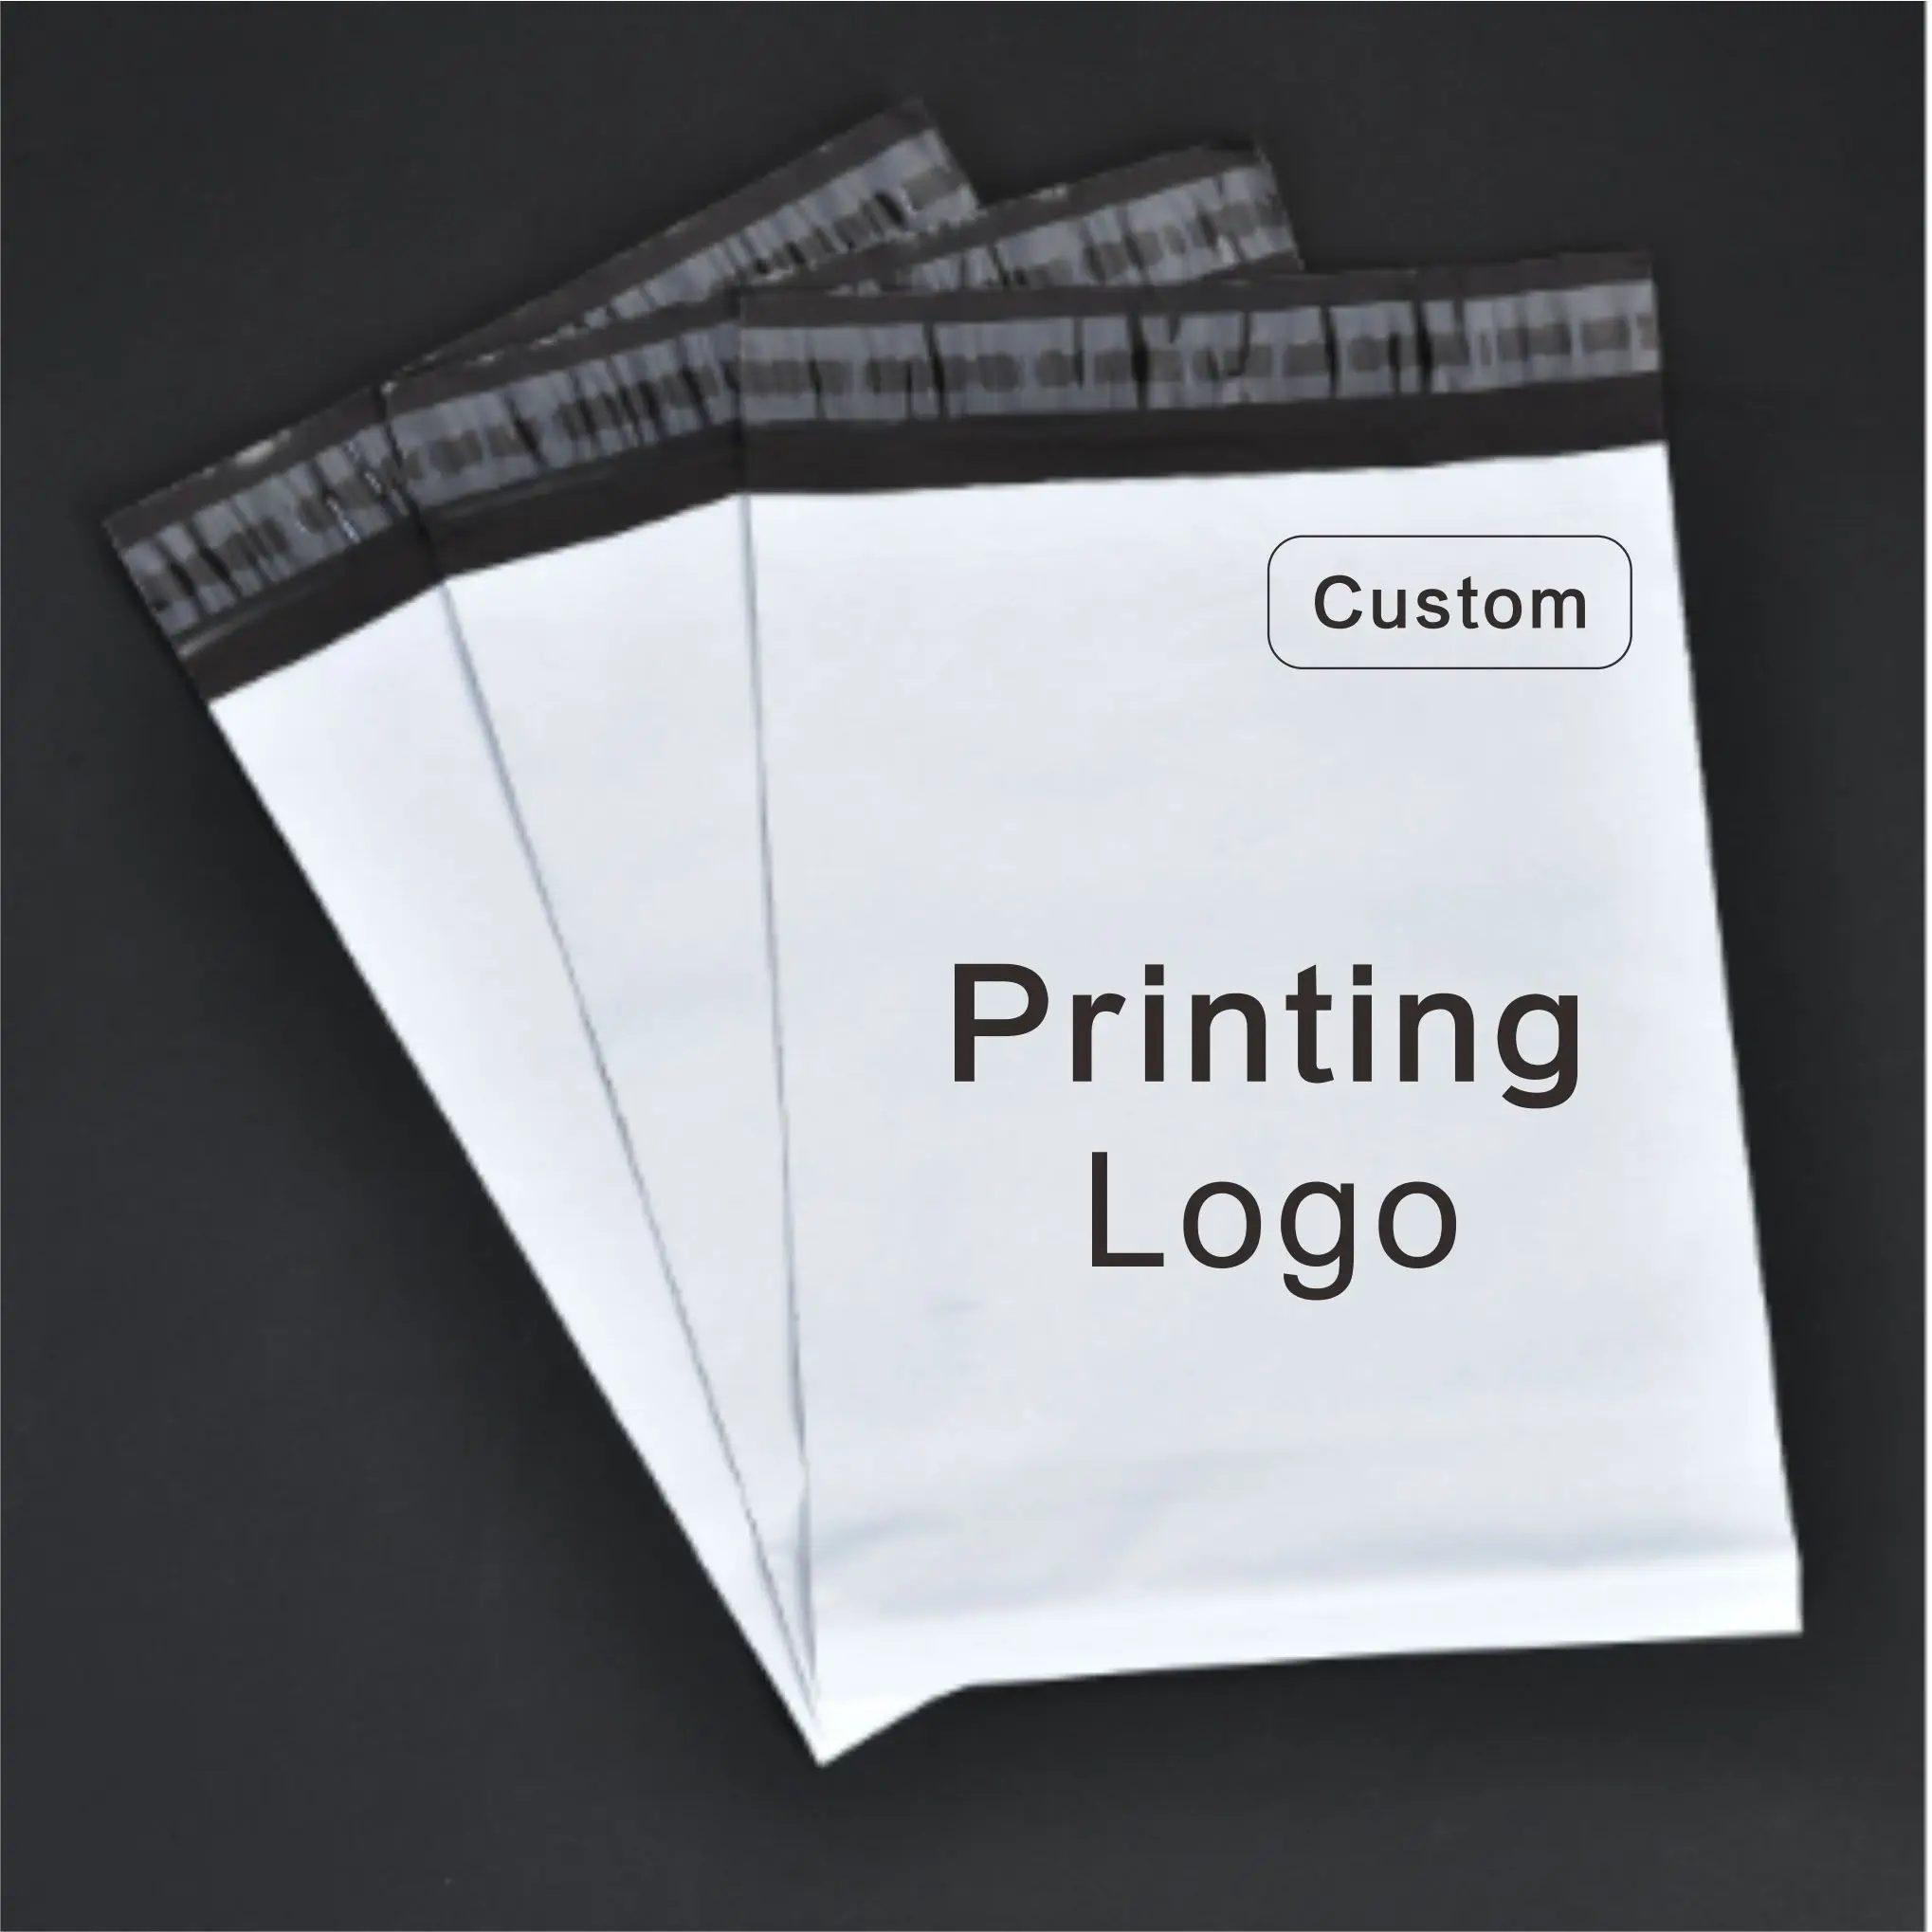 100pcs custom courier bag with logo self seal plastic storage mailing envelope bags Courier envelope packaging printing